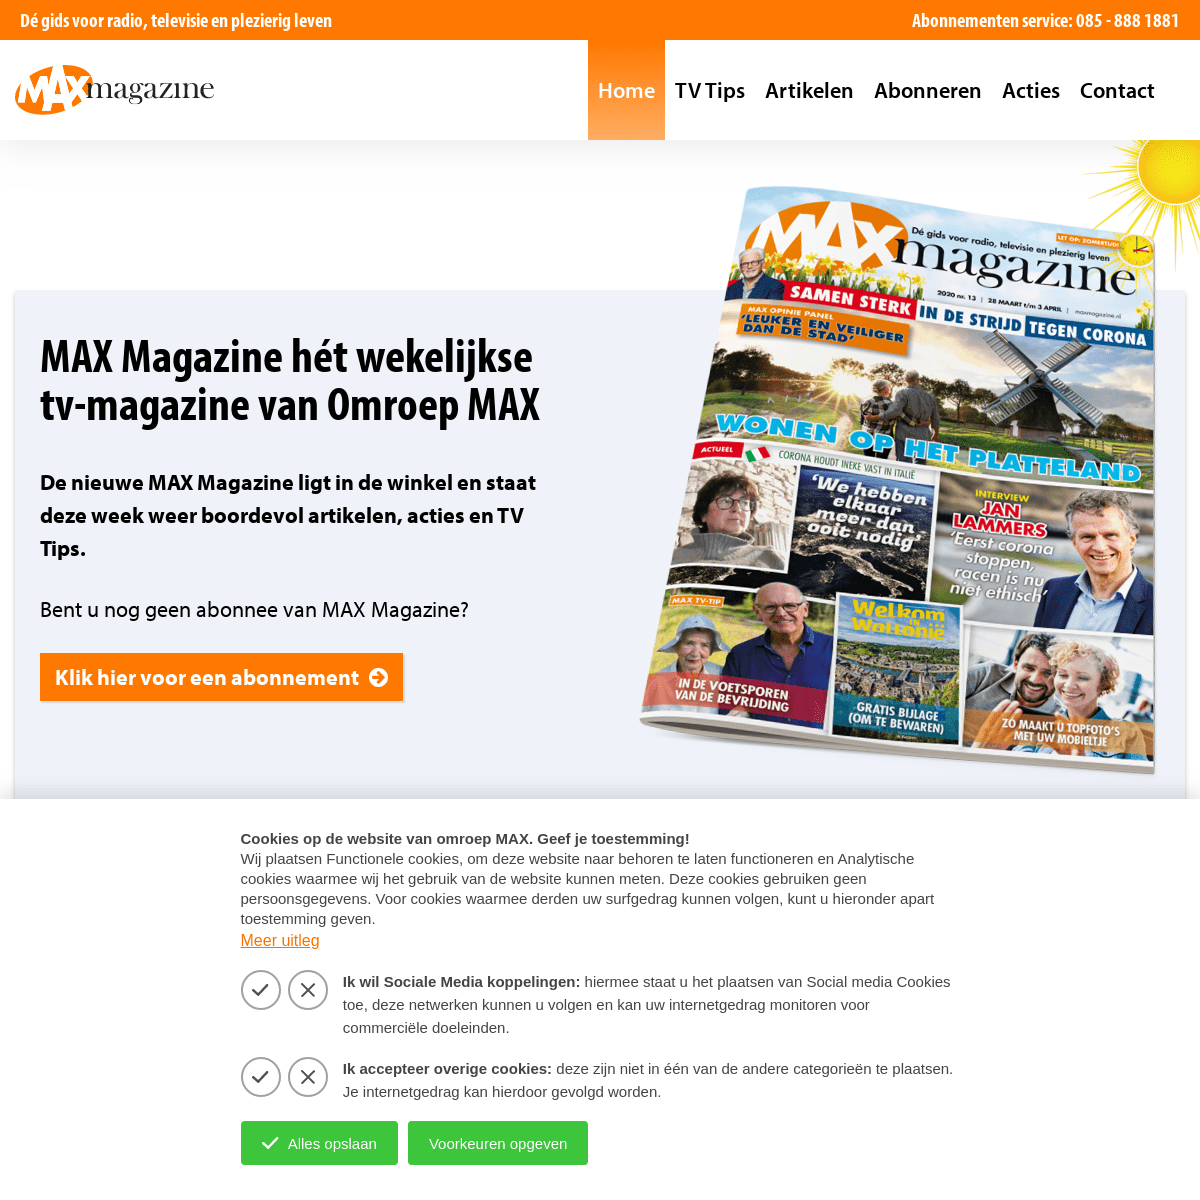 A complete backup of maxmagazine.nl